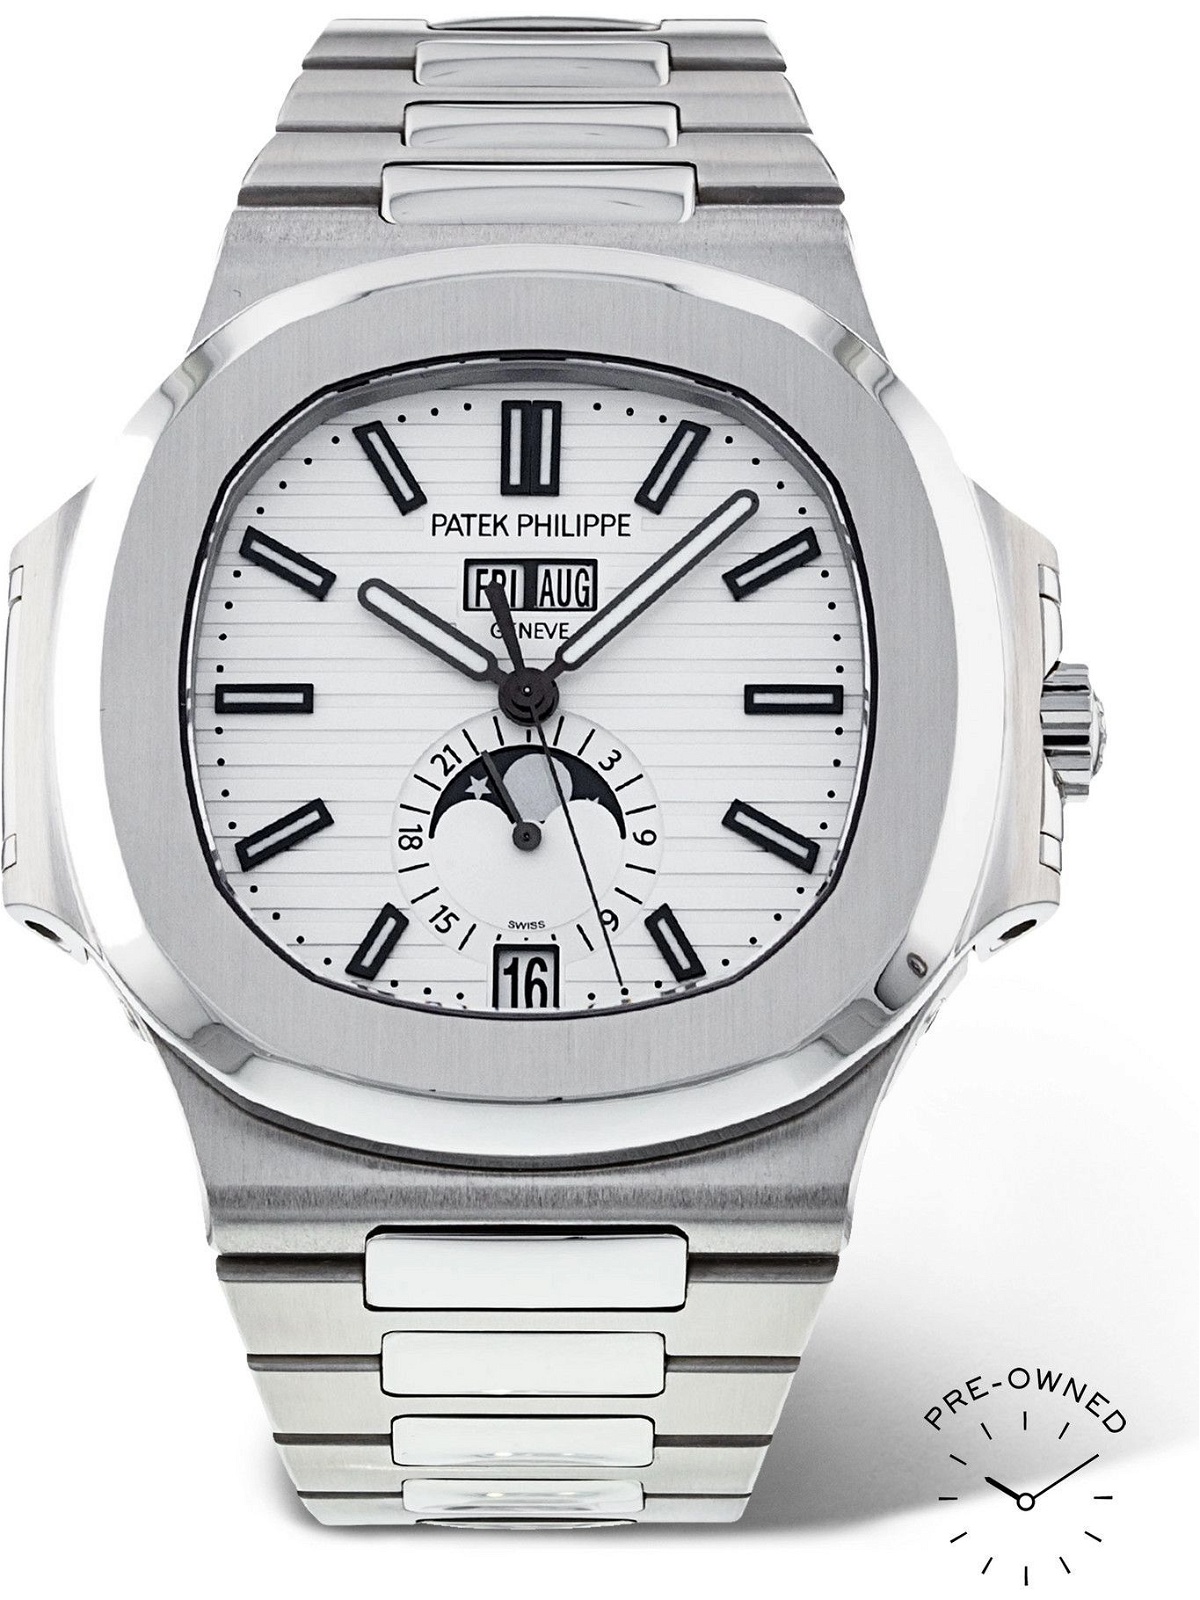 Photo: PATEK PHILIPPE - Pre-Owned 2017 Nautilus Calendar Automatic 40.5mm Steel Watch, Ref. No. 5726/1A-010